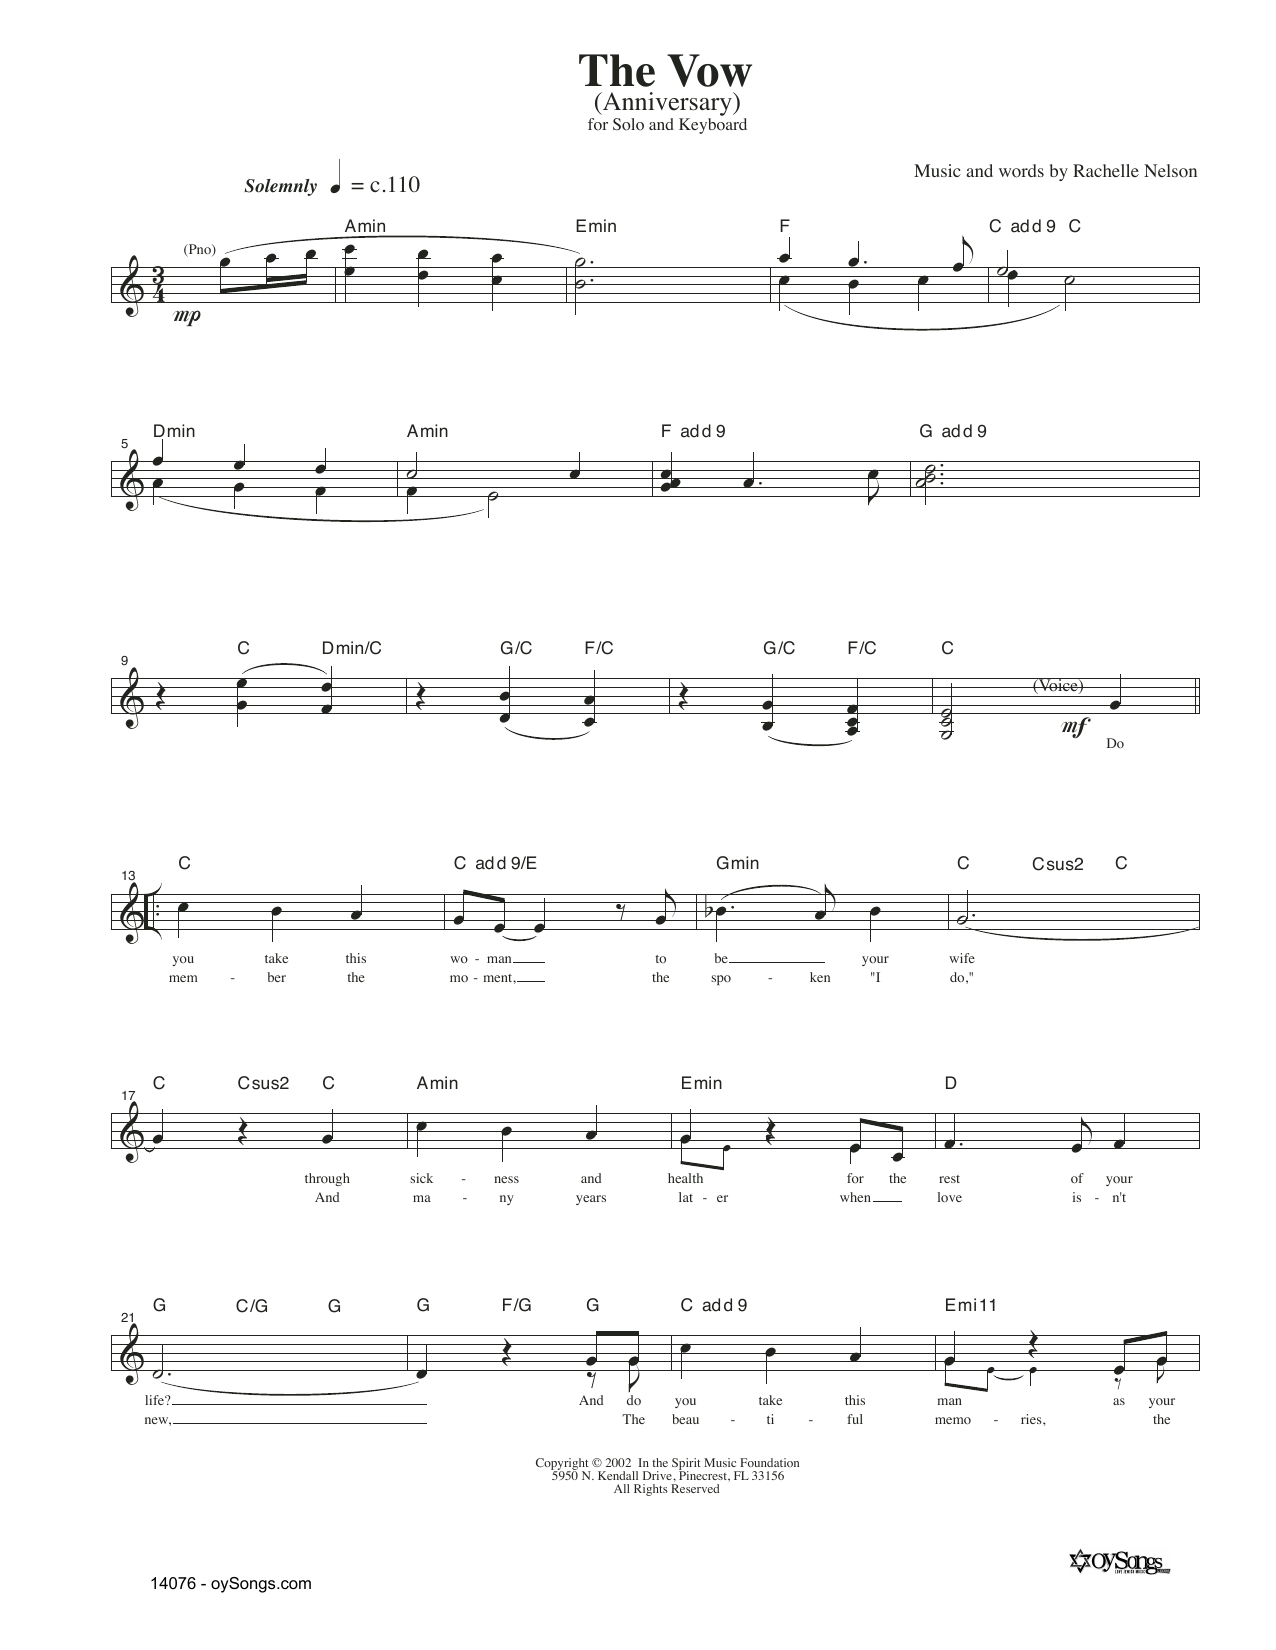 Download Rachelle Nelson The Vow Sheet Music